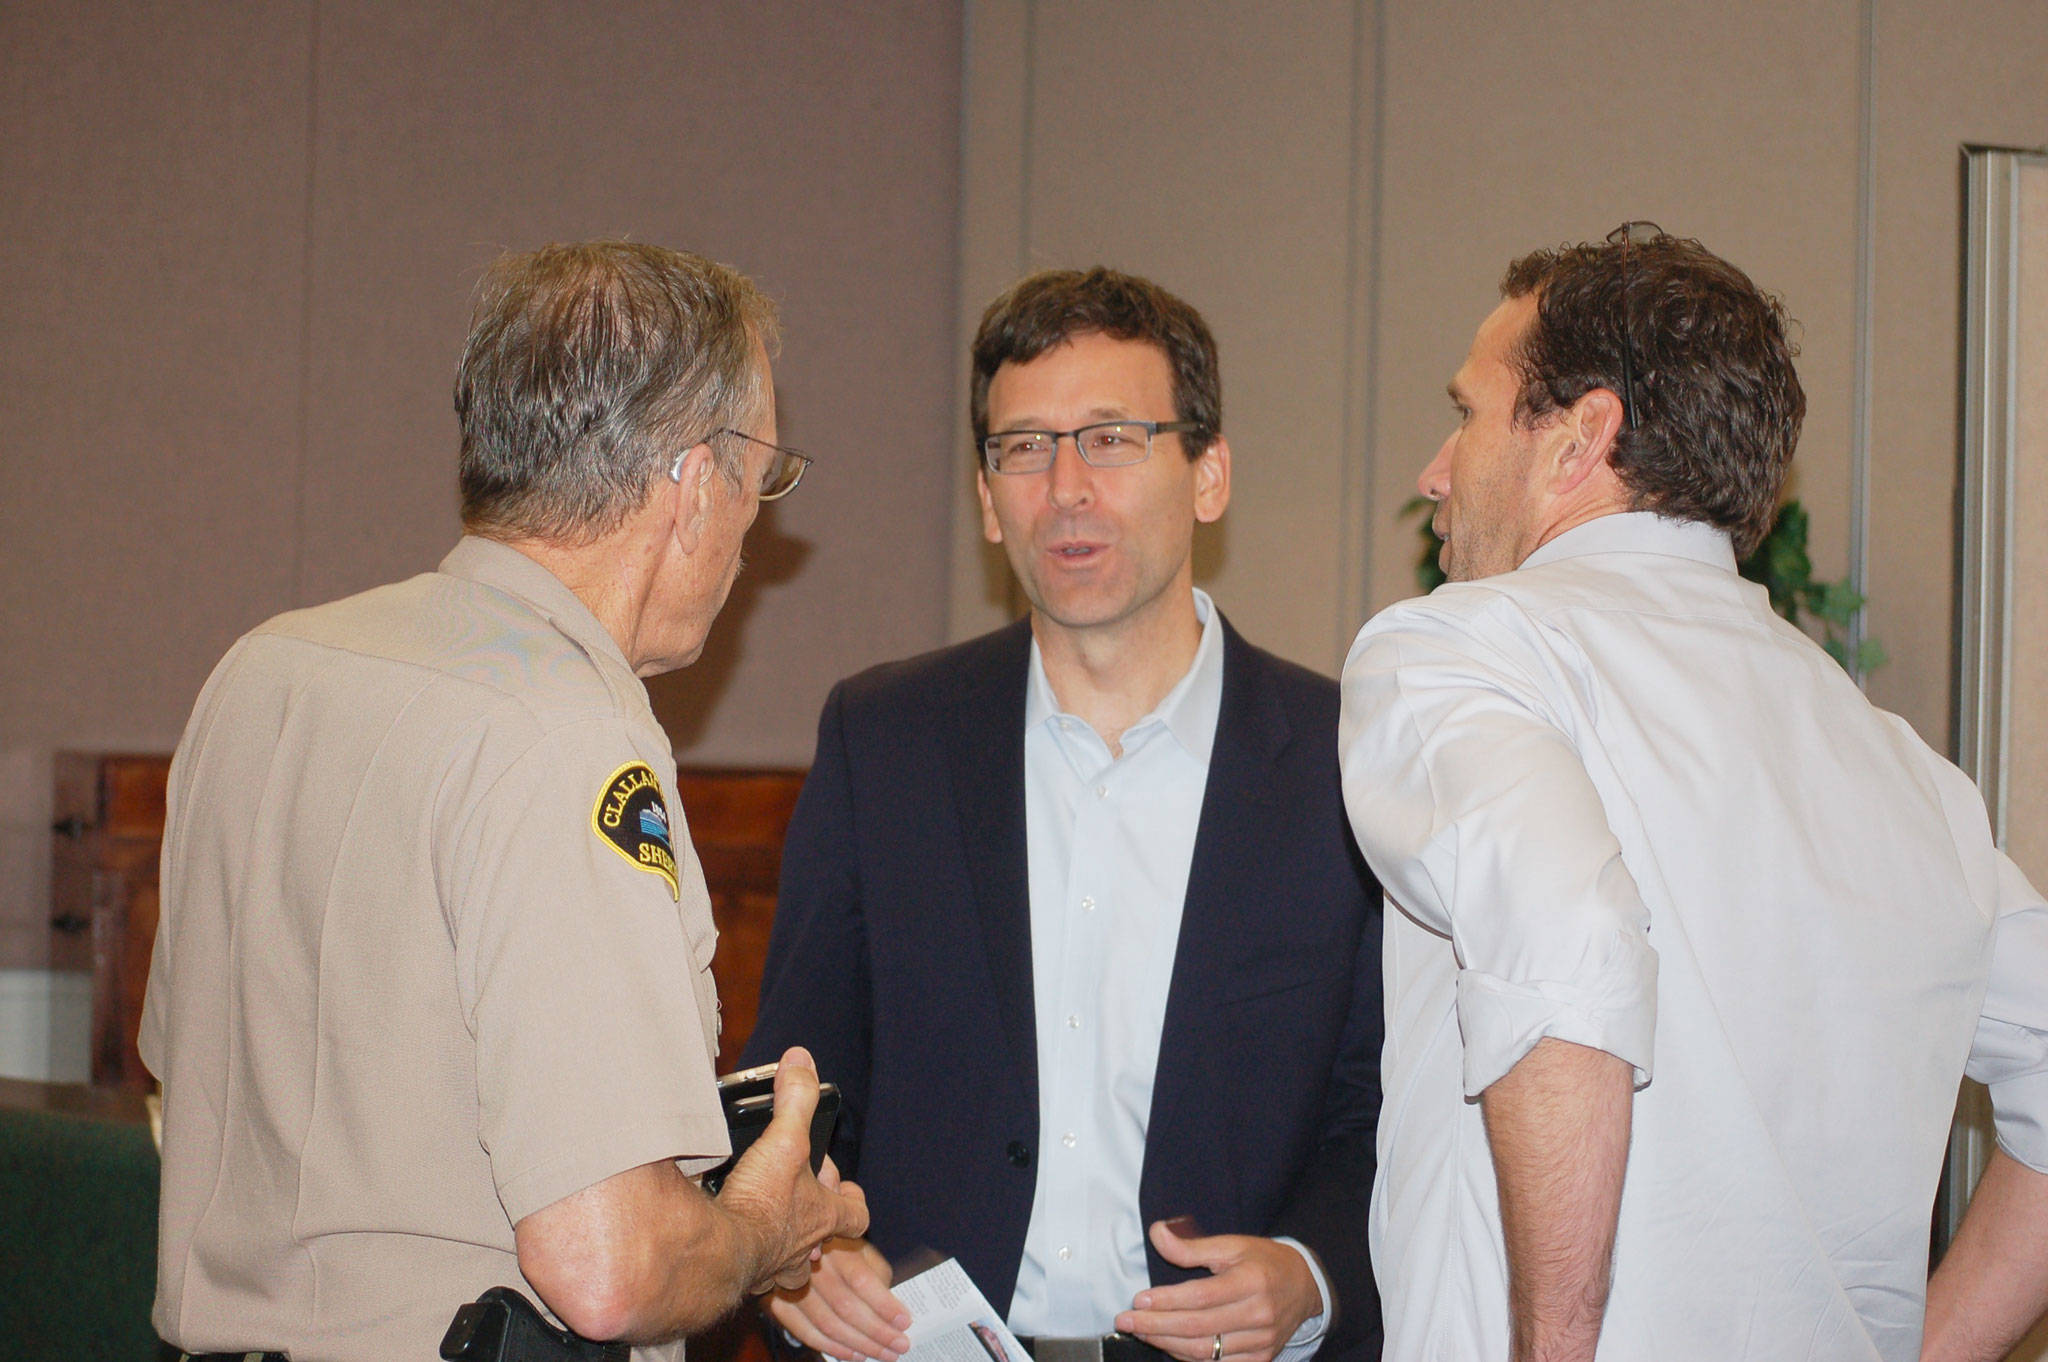 Washington State Attorney General Bob Ferguson, center, talks with Clallam County Sheriff Bill Benedict, left, and Rotary members after the Sequim Sunrise Rotary meeting on Friday, Aug. 18, where he stopped to pay a visit on his way to the ceremony naming the Daniel J. Evans Winderness at Hurricane Ridge. Sequim Gazette photo by Erin Hawkins